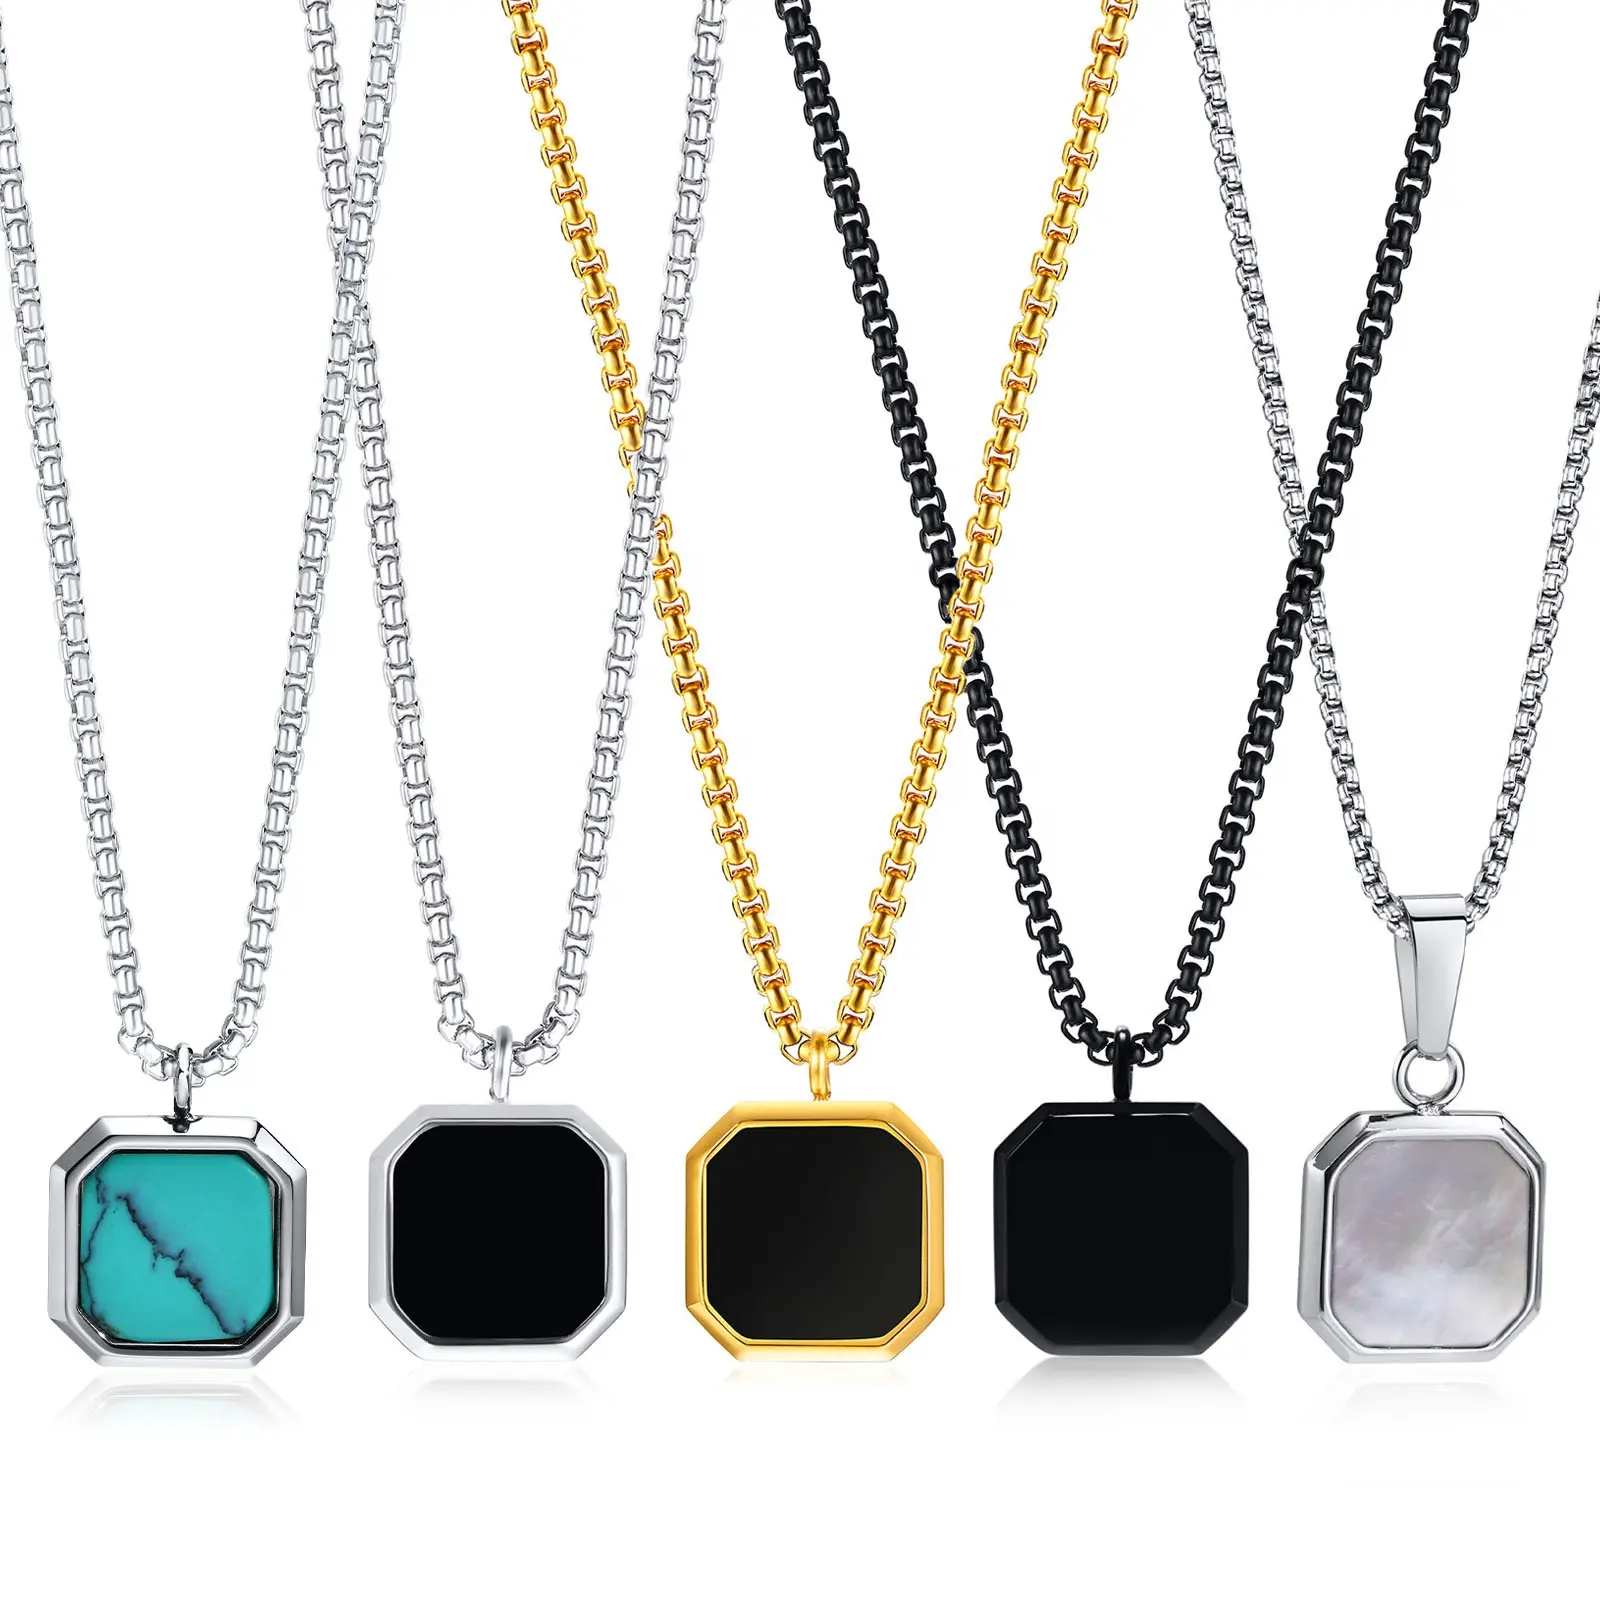 MECYLIFE Stainless Steel Drop Glue Black Square Pendant Men's Long Sweater Chain Necklace Accessories